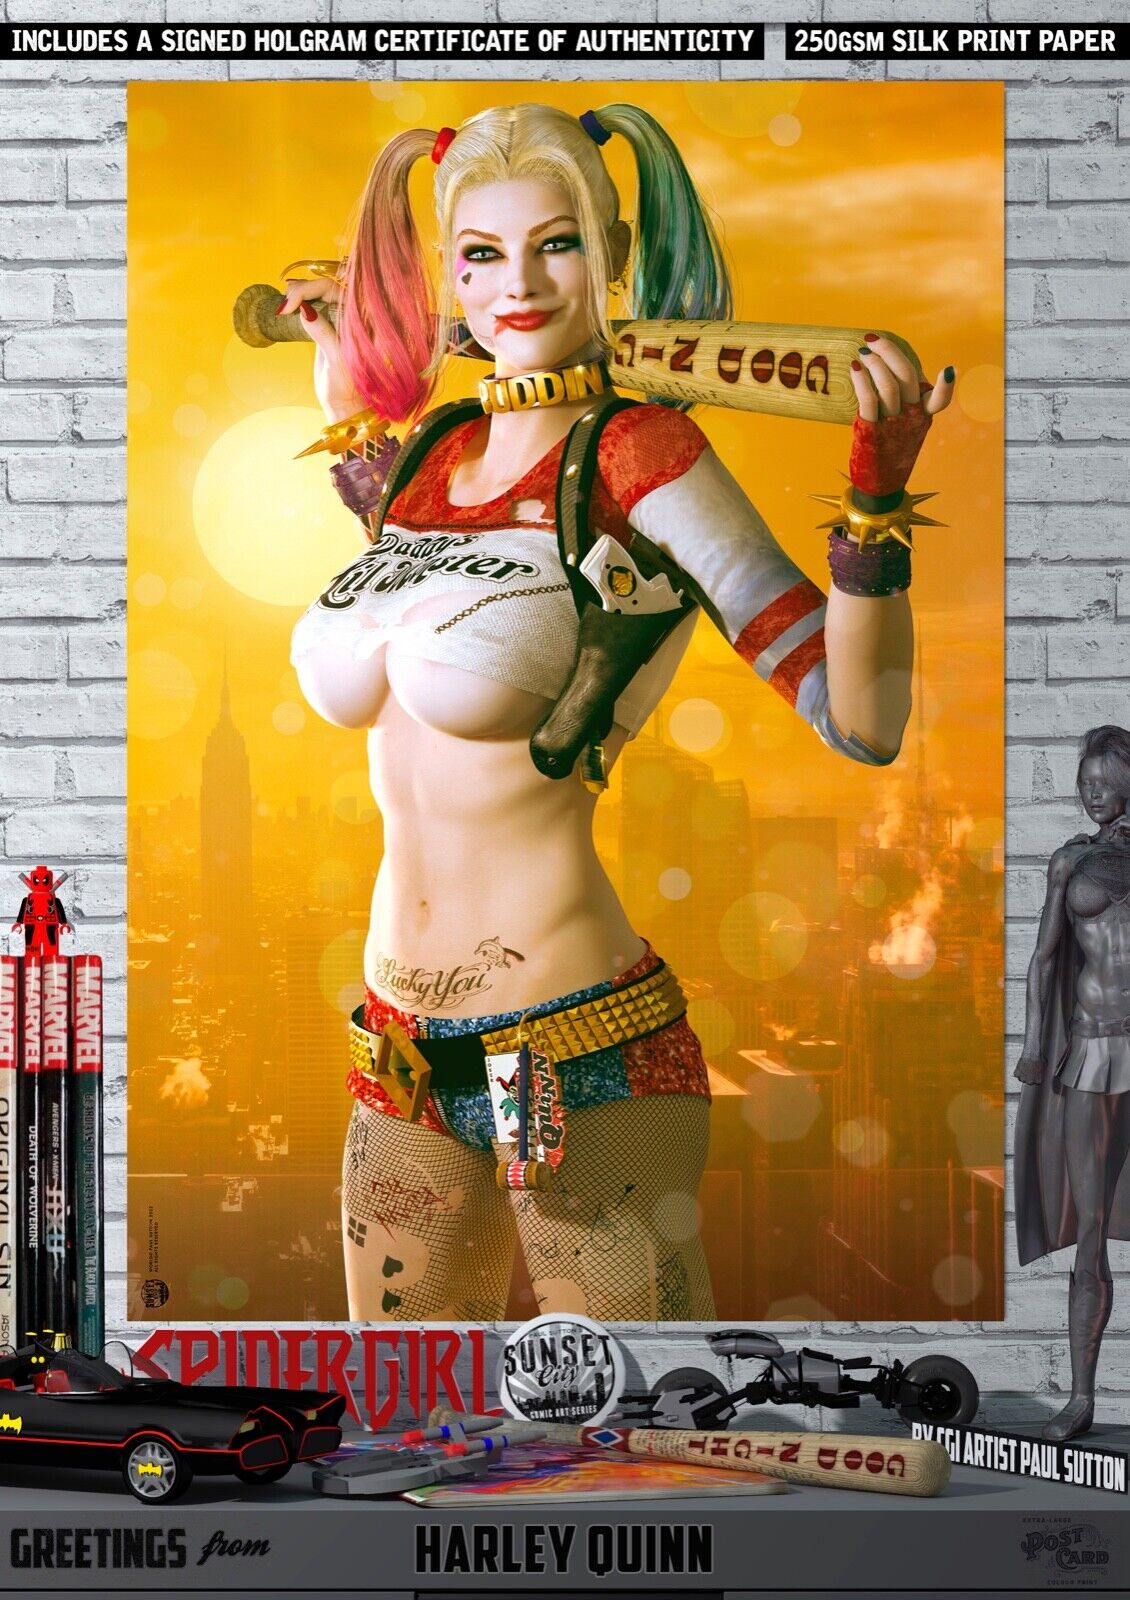 david wone recommends harley quinn sex pics pic